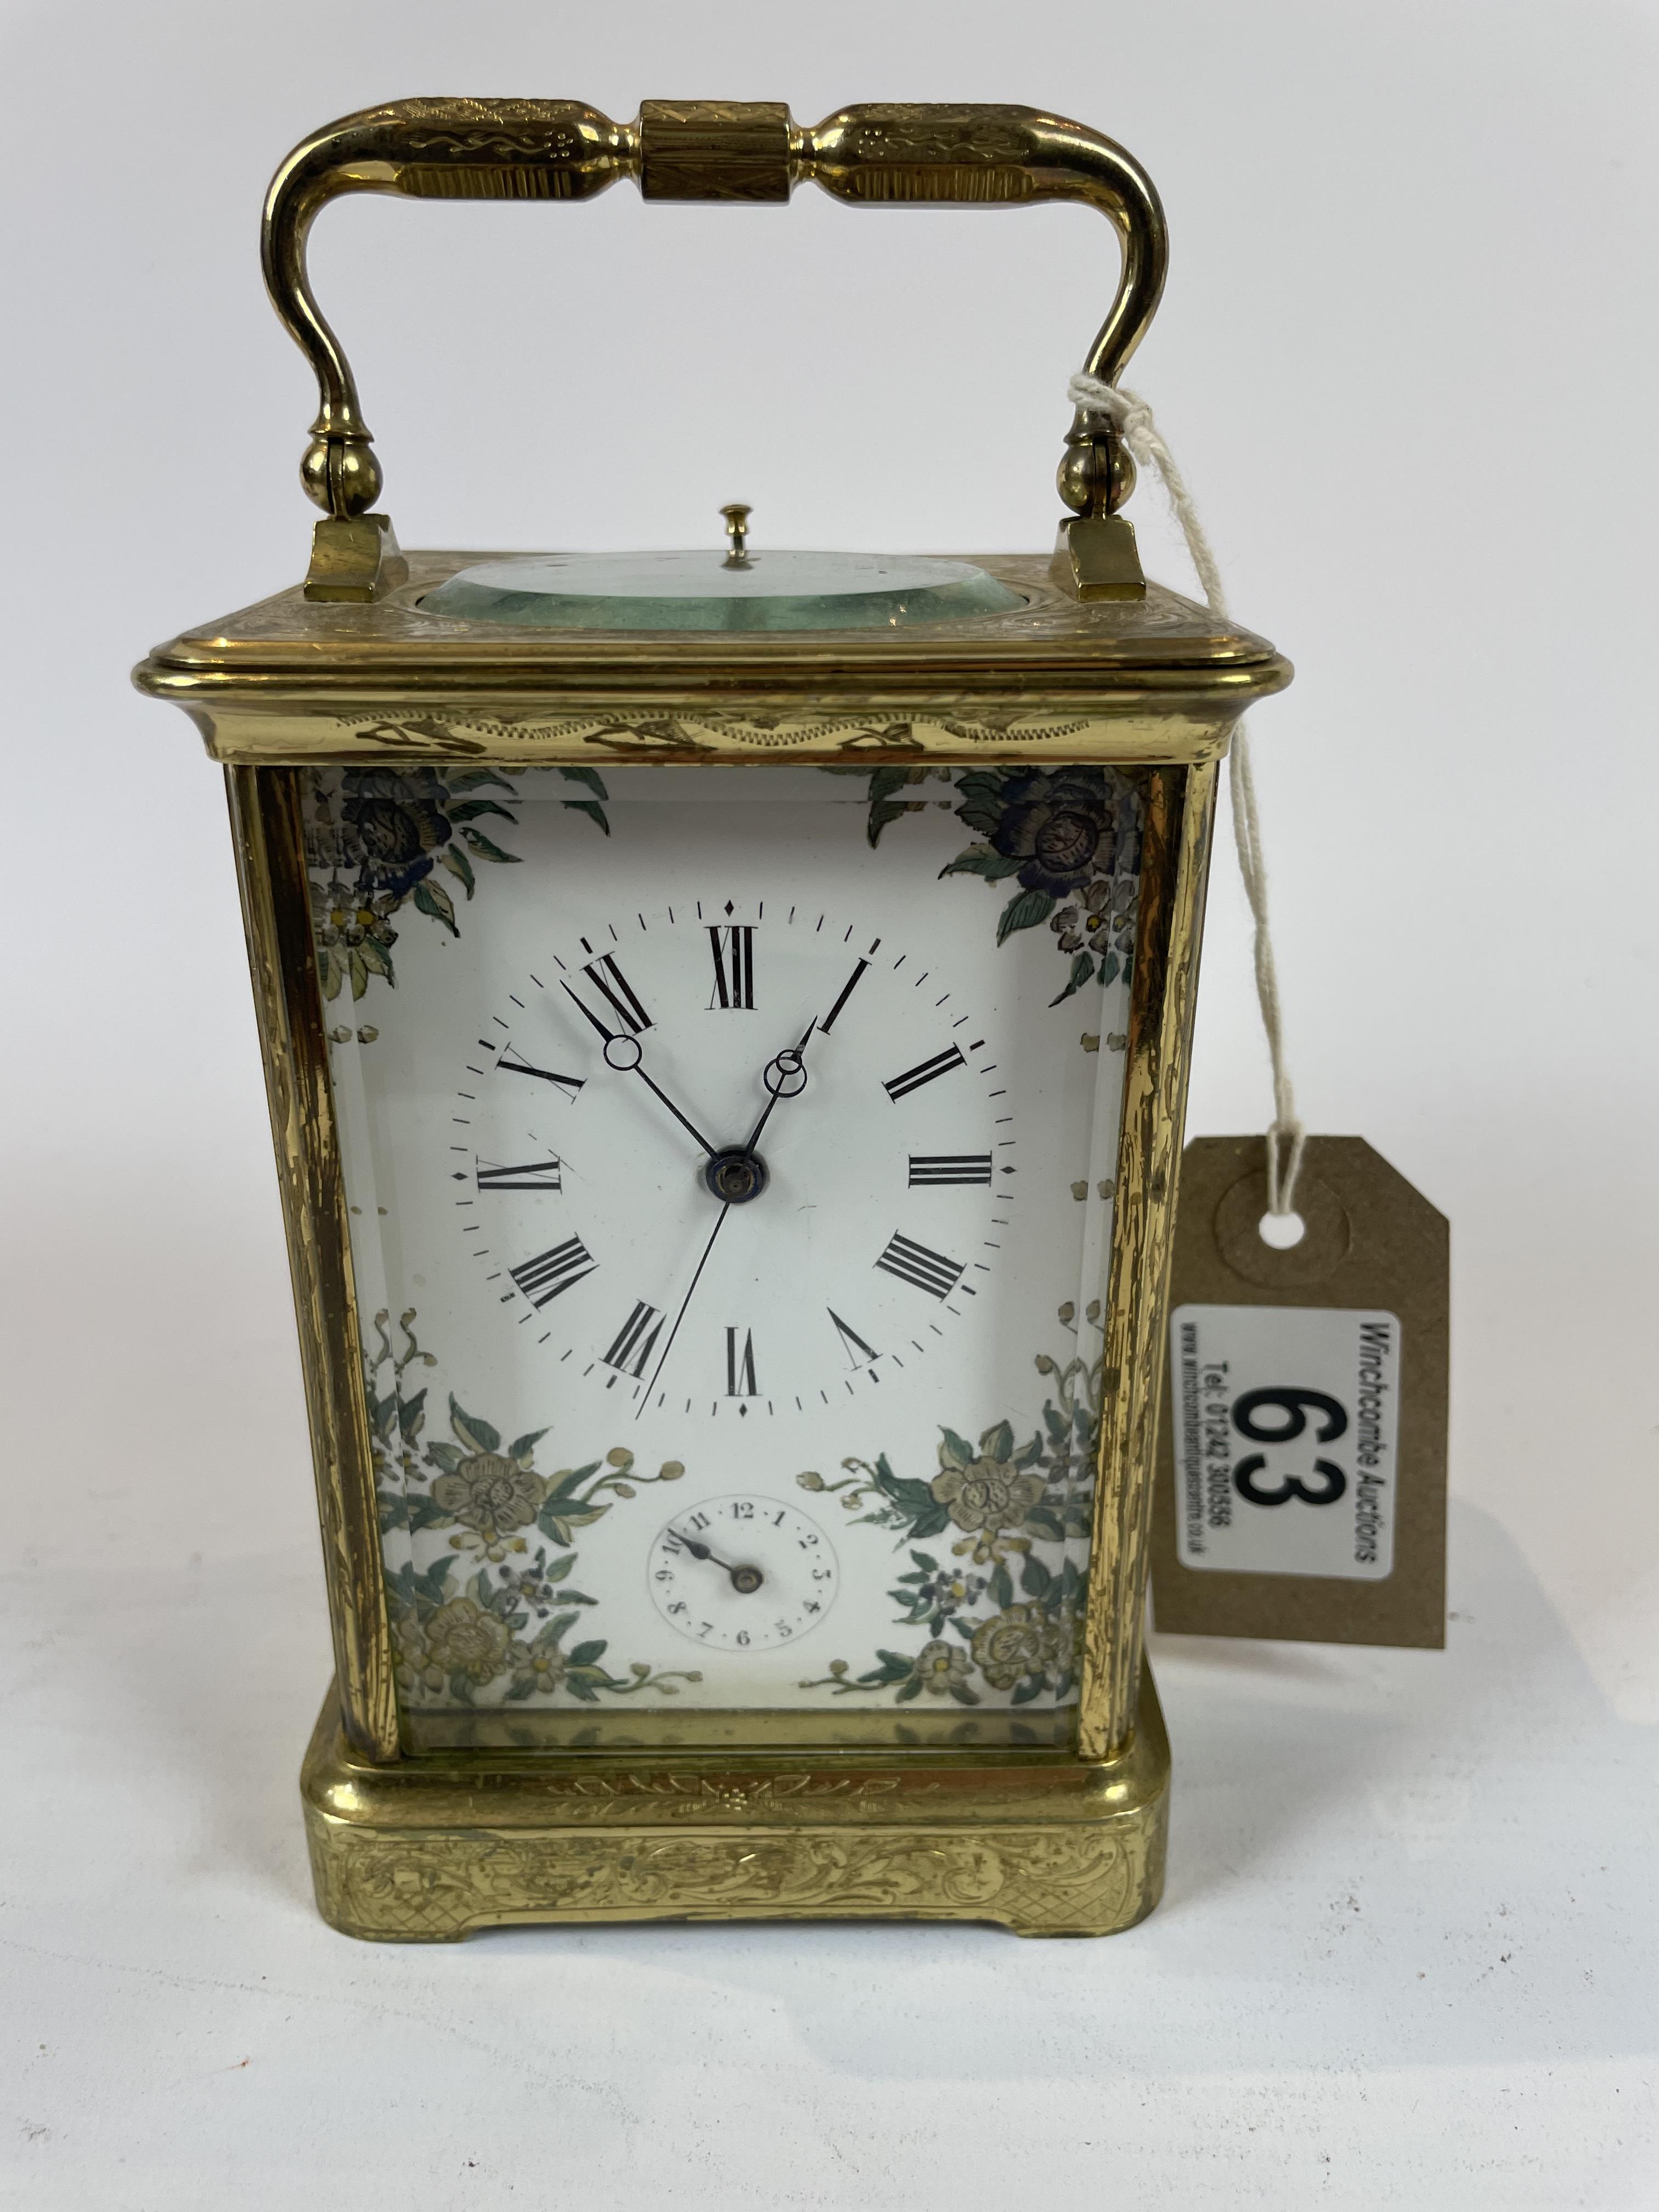 Repeater Carriage Clock with floral design